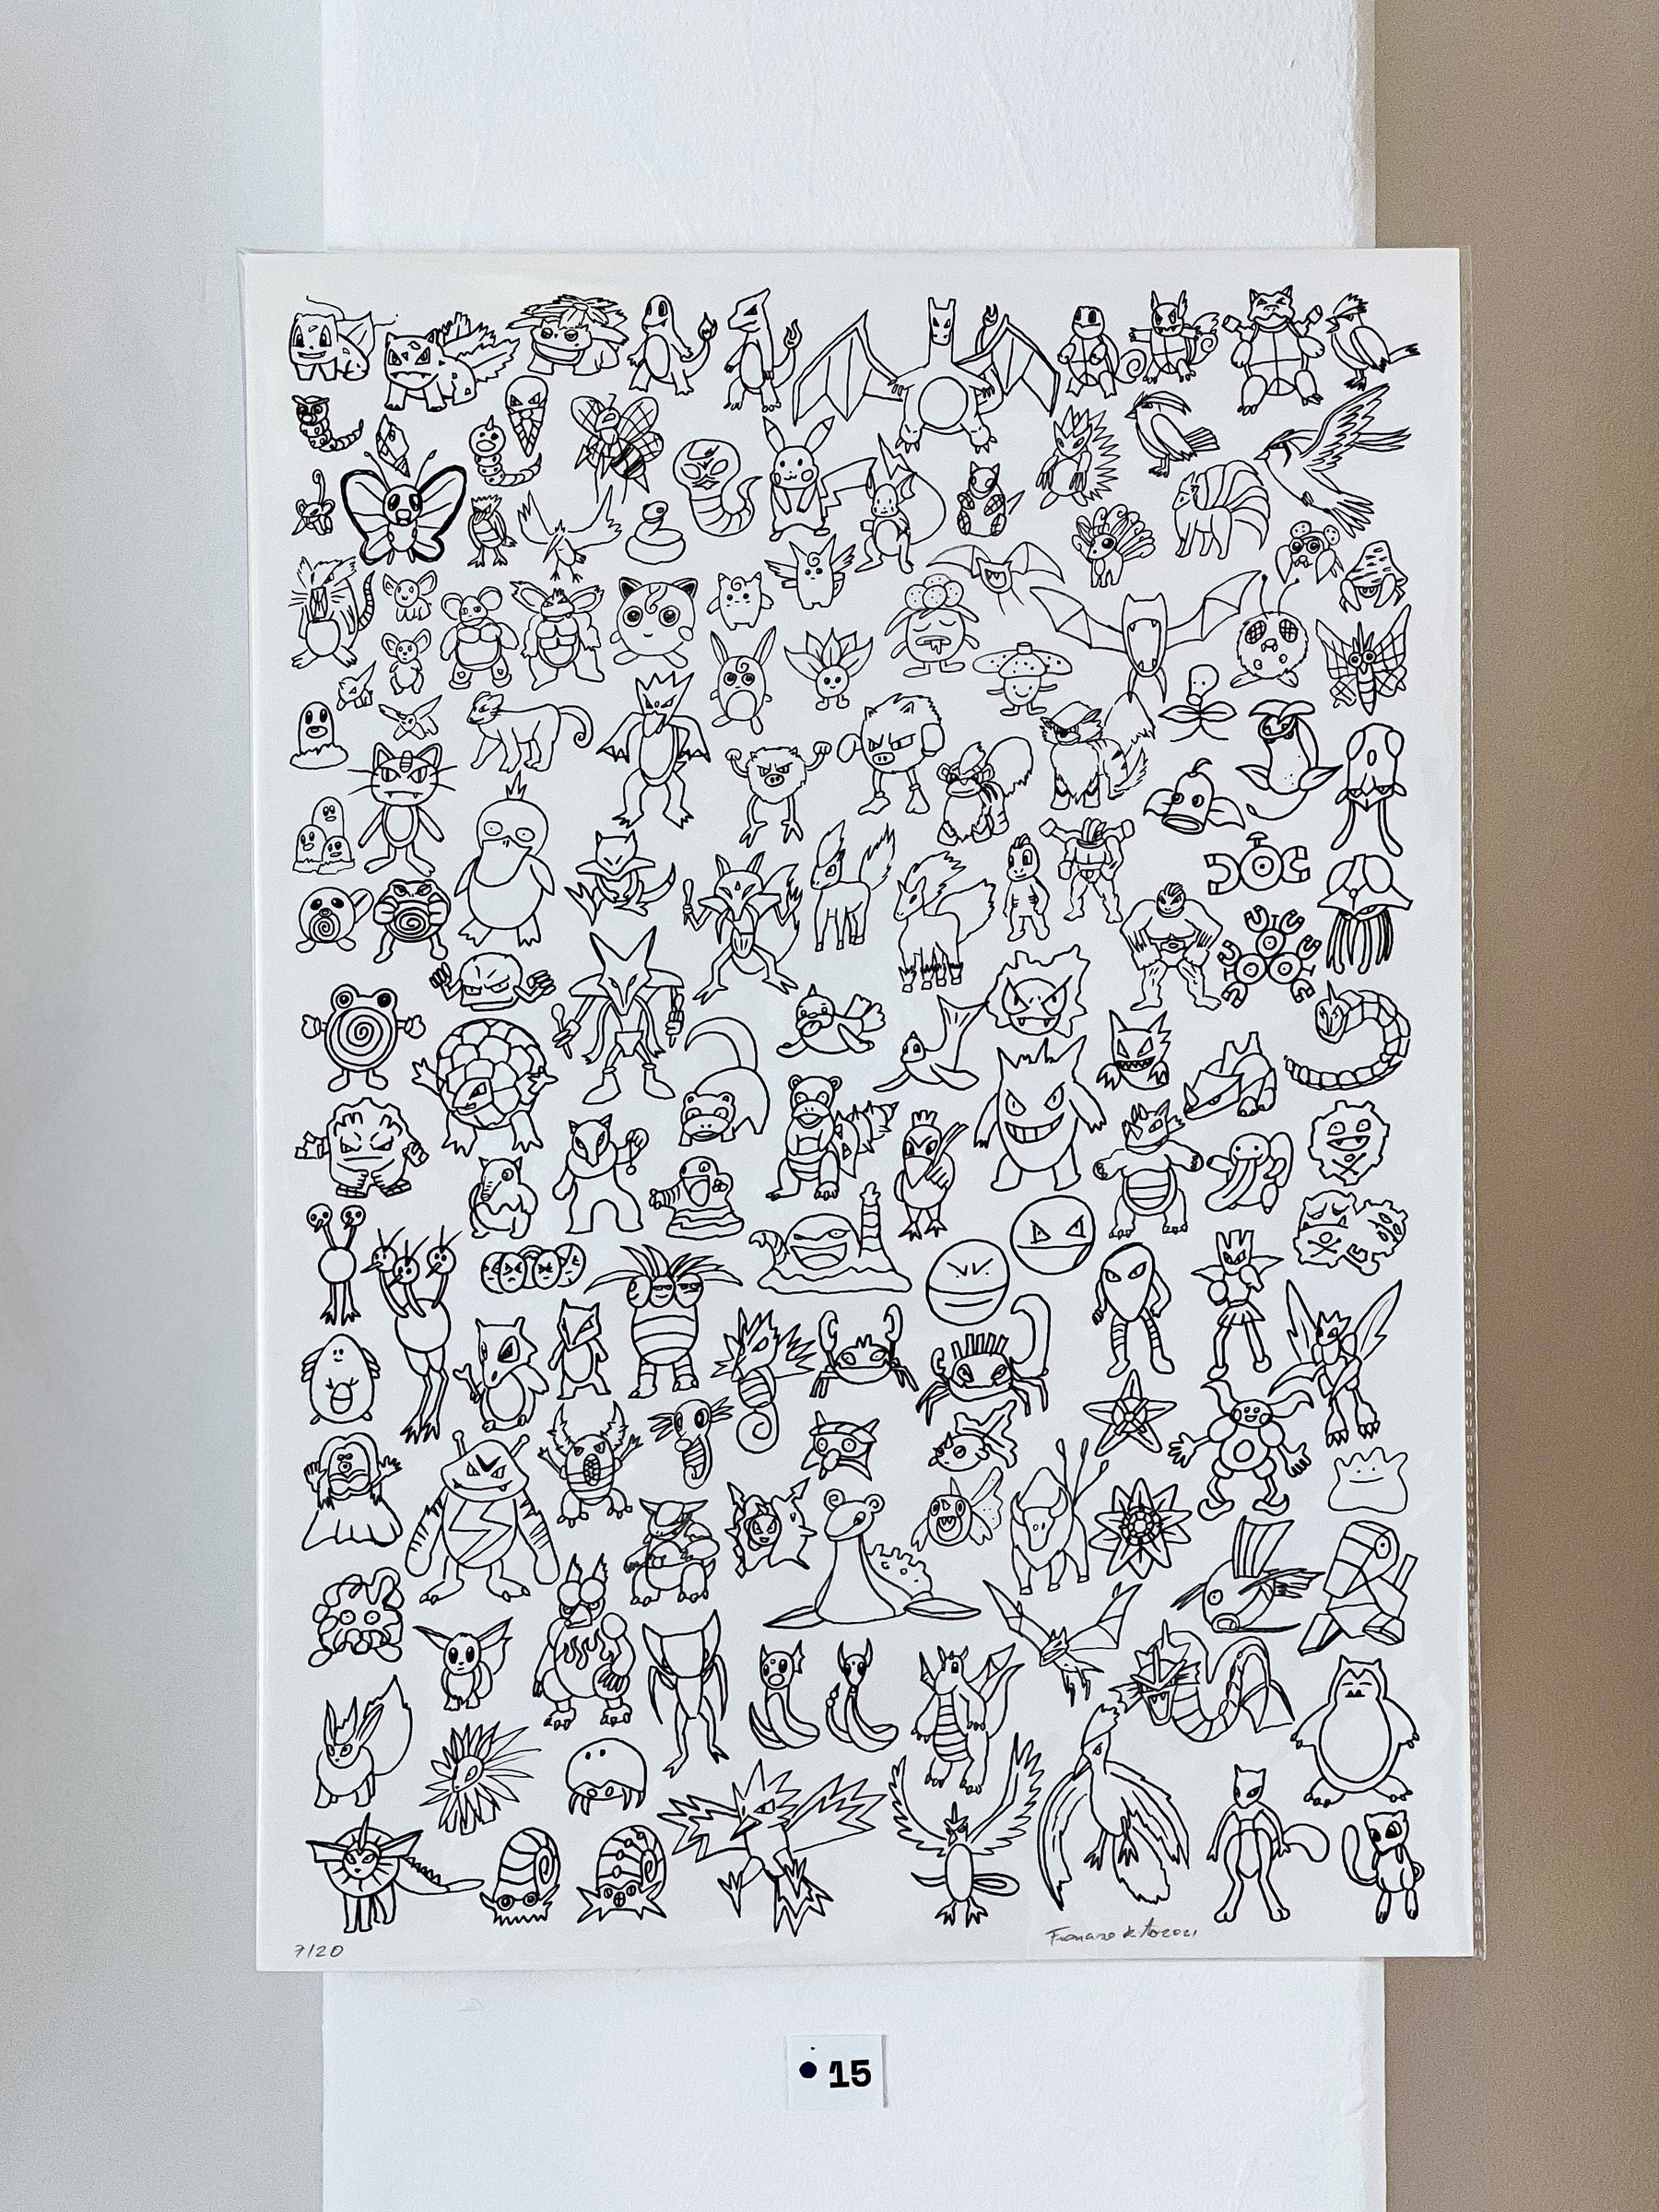 A sheet of paper with a ton of small drawings